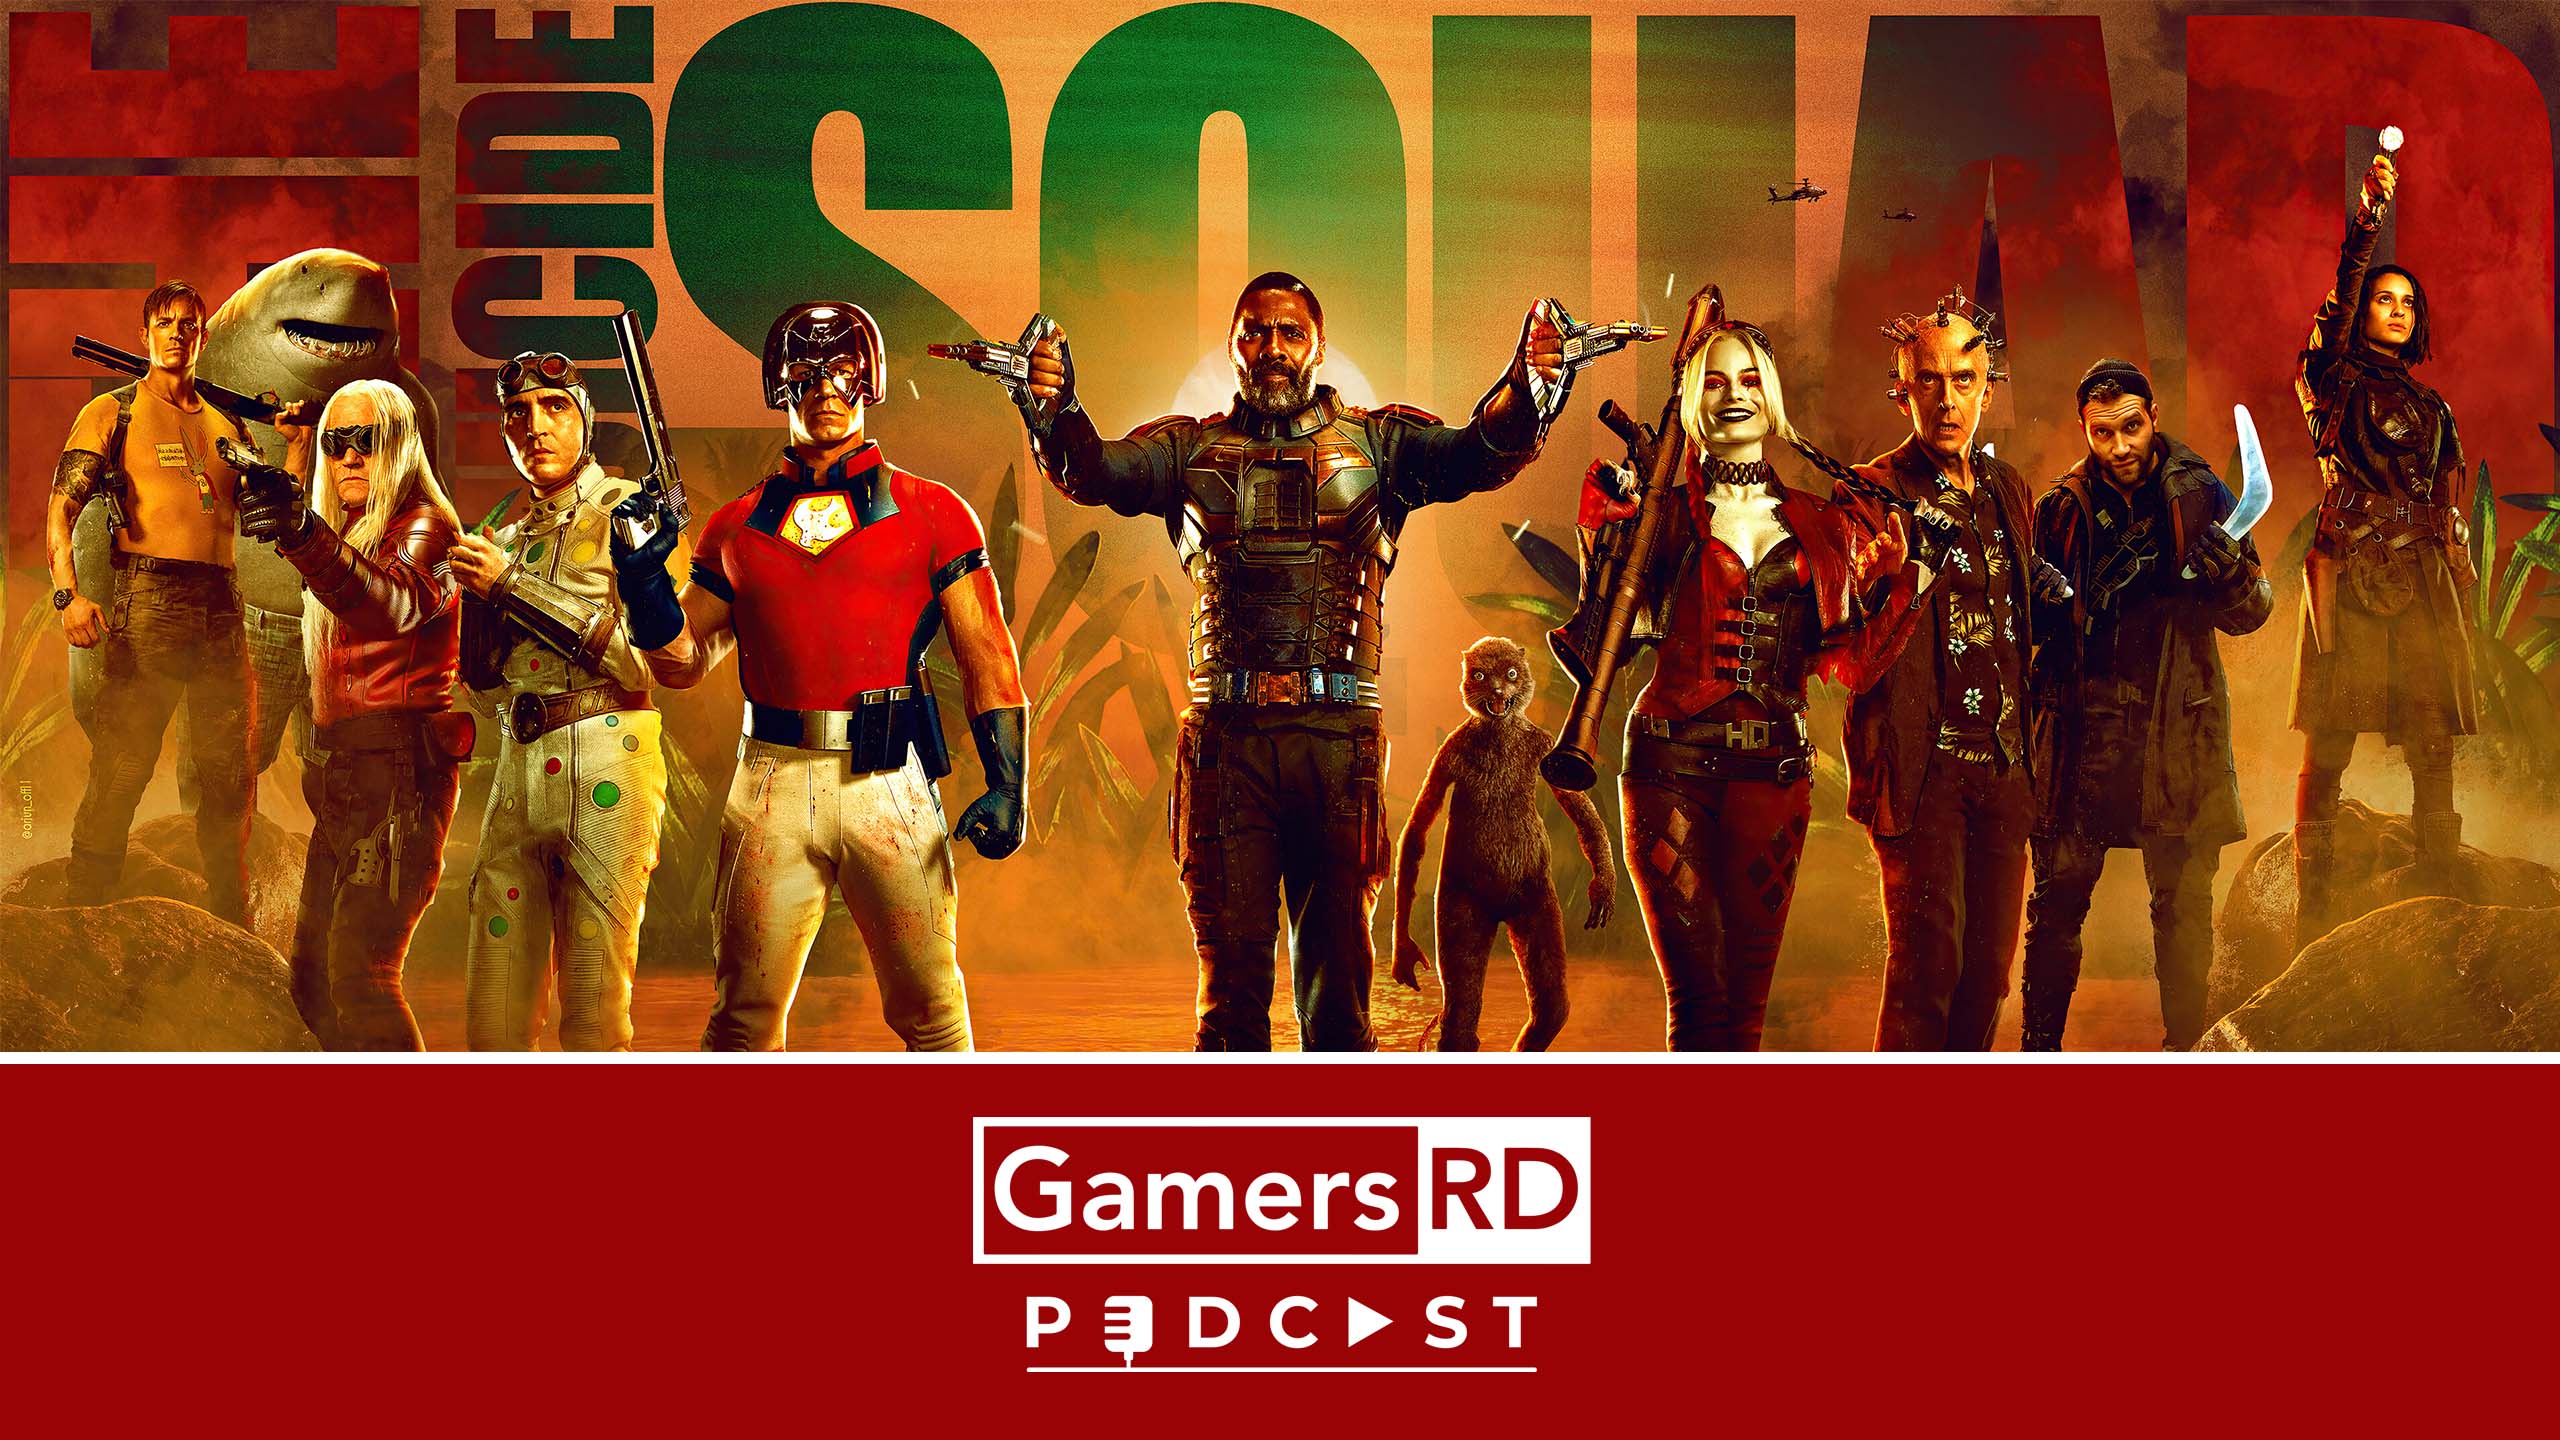 GamersRD Podcast The Suicide Squad opinion, GamersRD